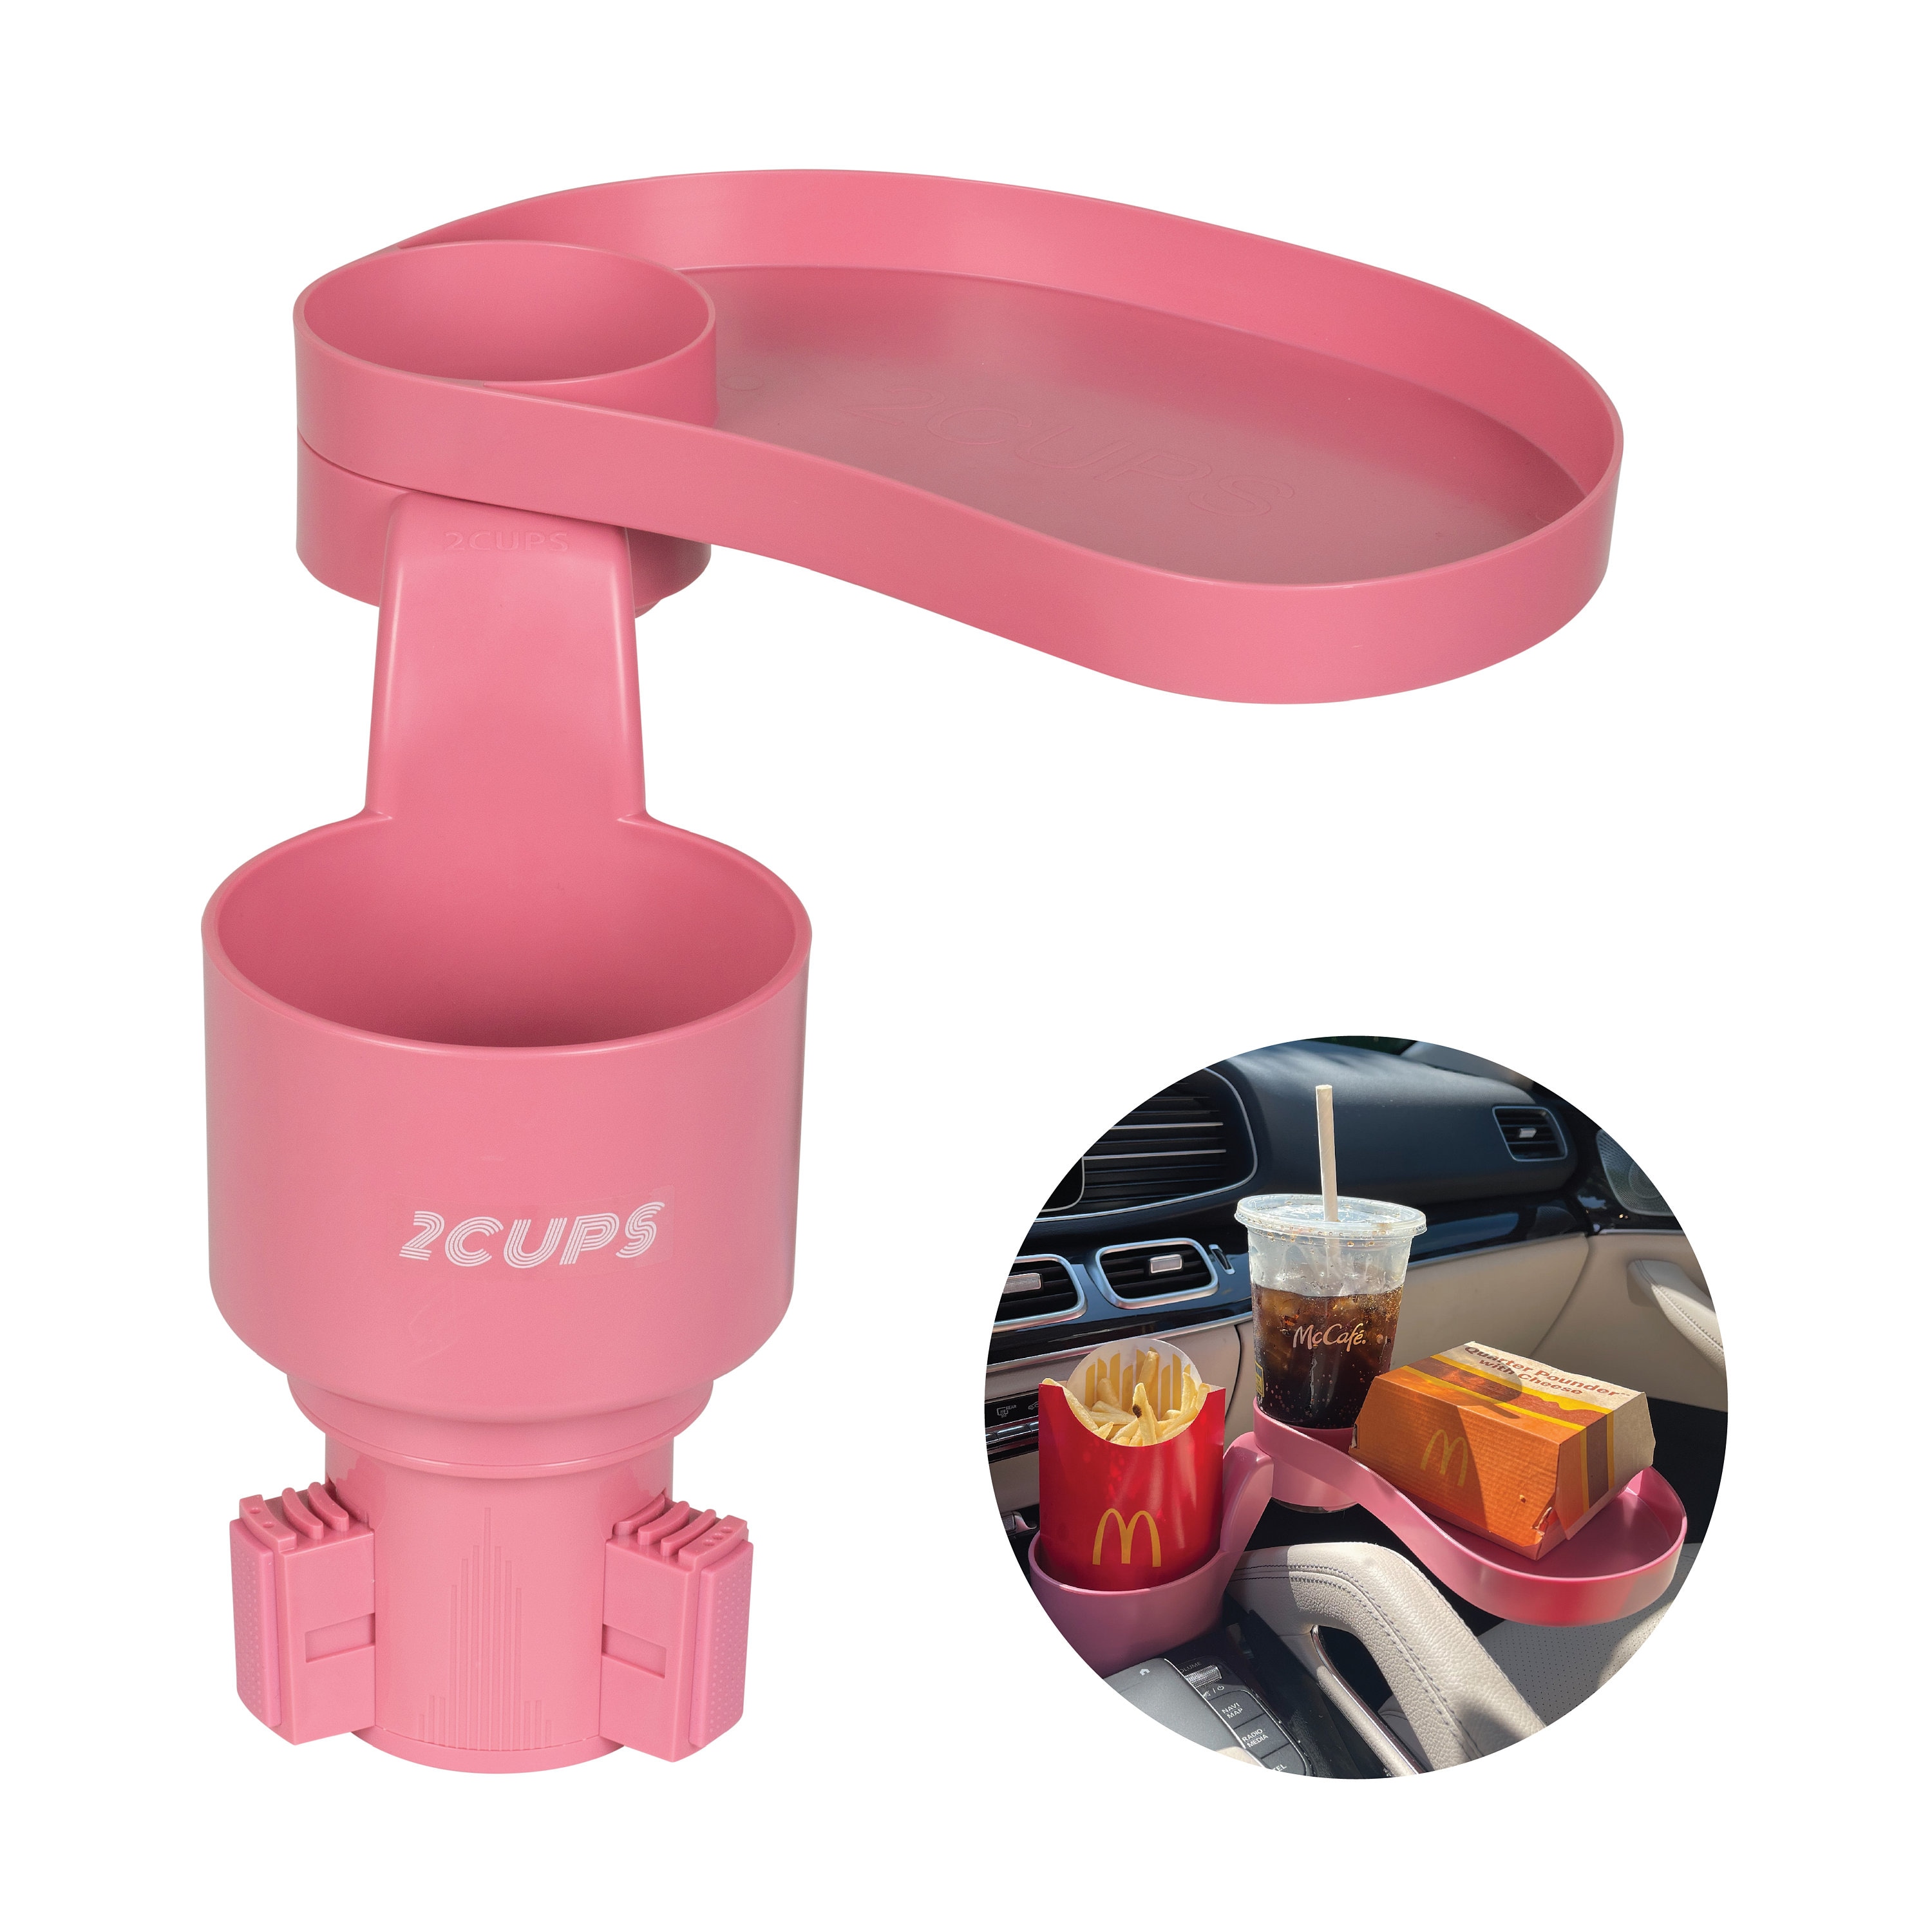 2CUPS Car Cup Holder Expander and Attachable Tray Set oval/rectangle PINK 